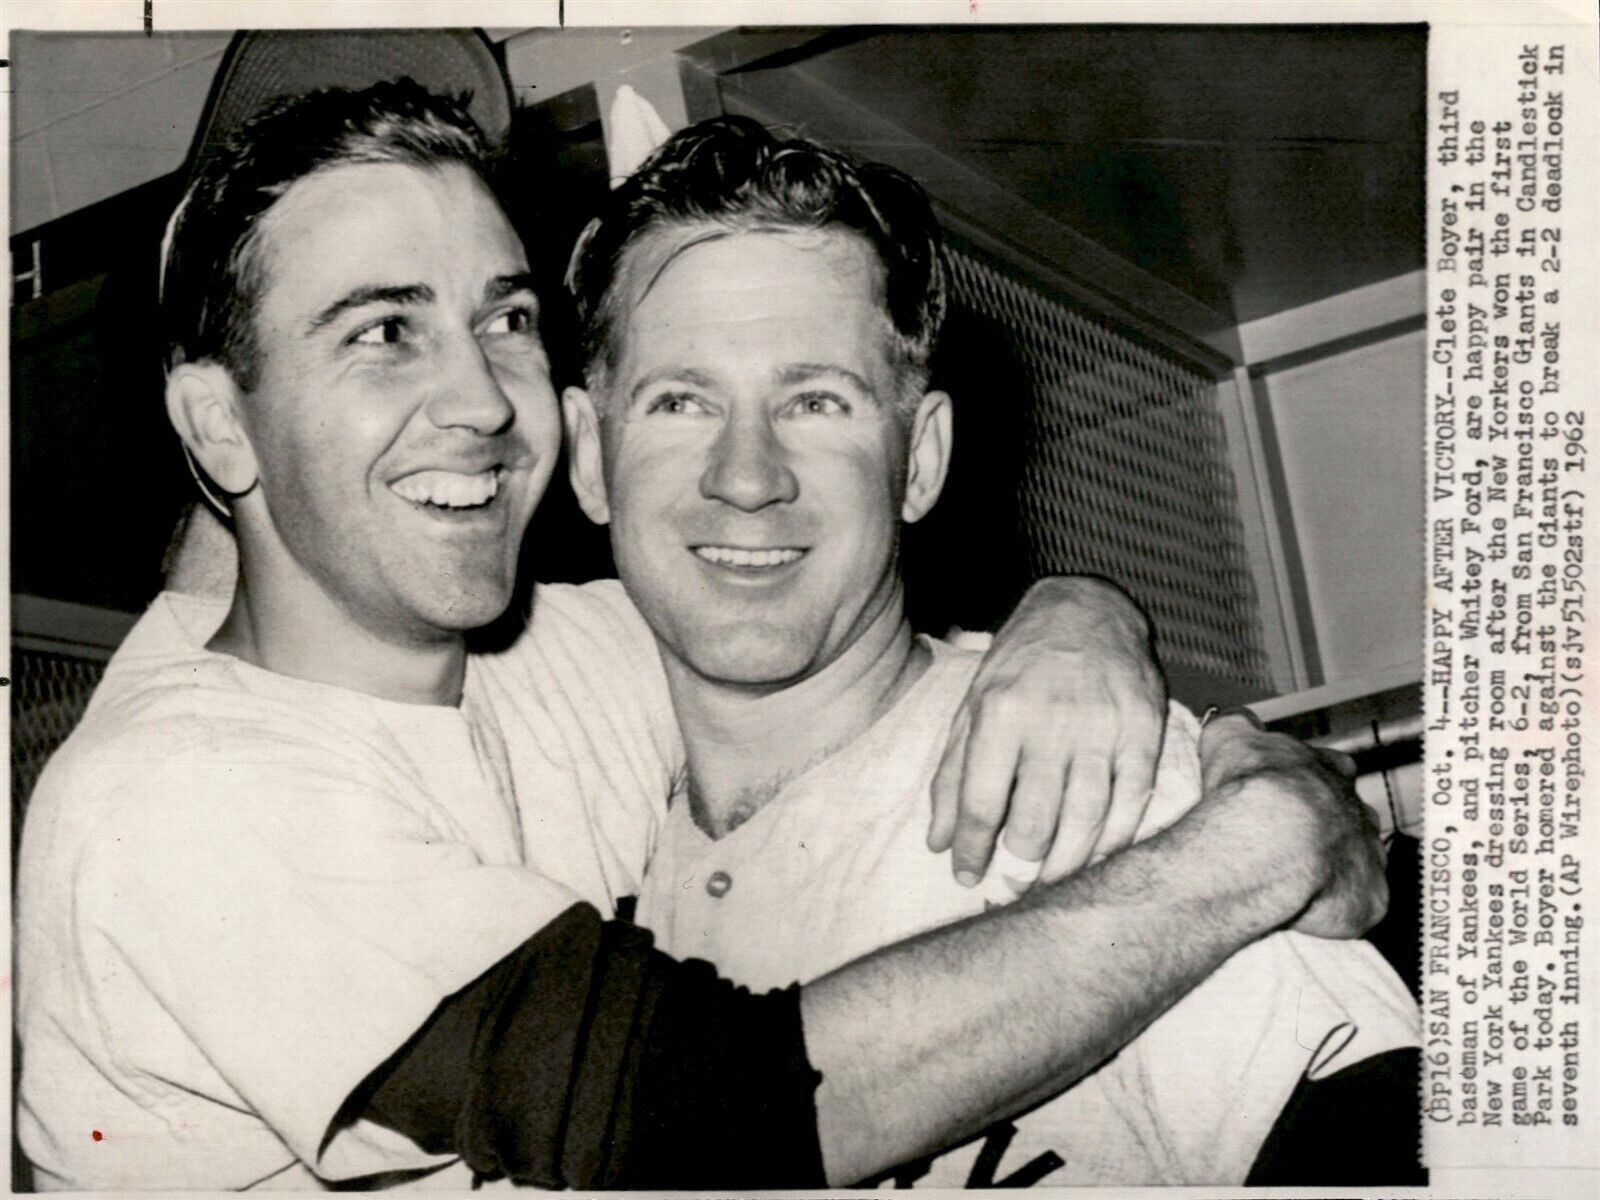 LG903 1962 AP Wire Photo HAPPY AFTER VICTORY NY Yankees CLETE BOYER WHITEY FORD